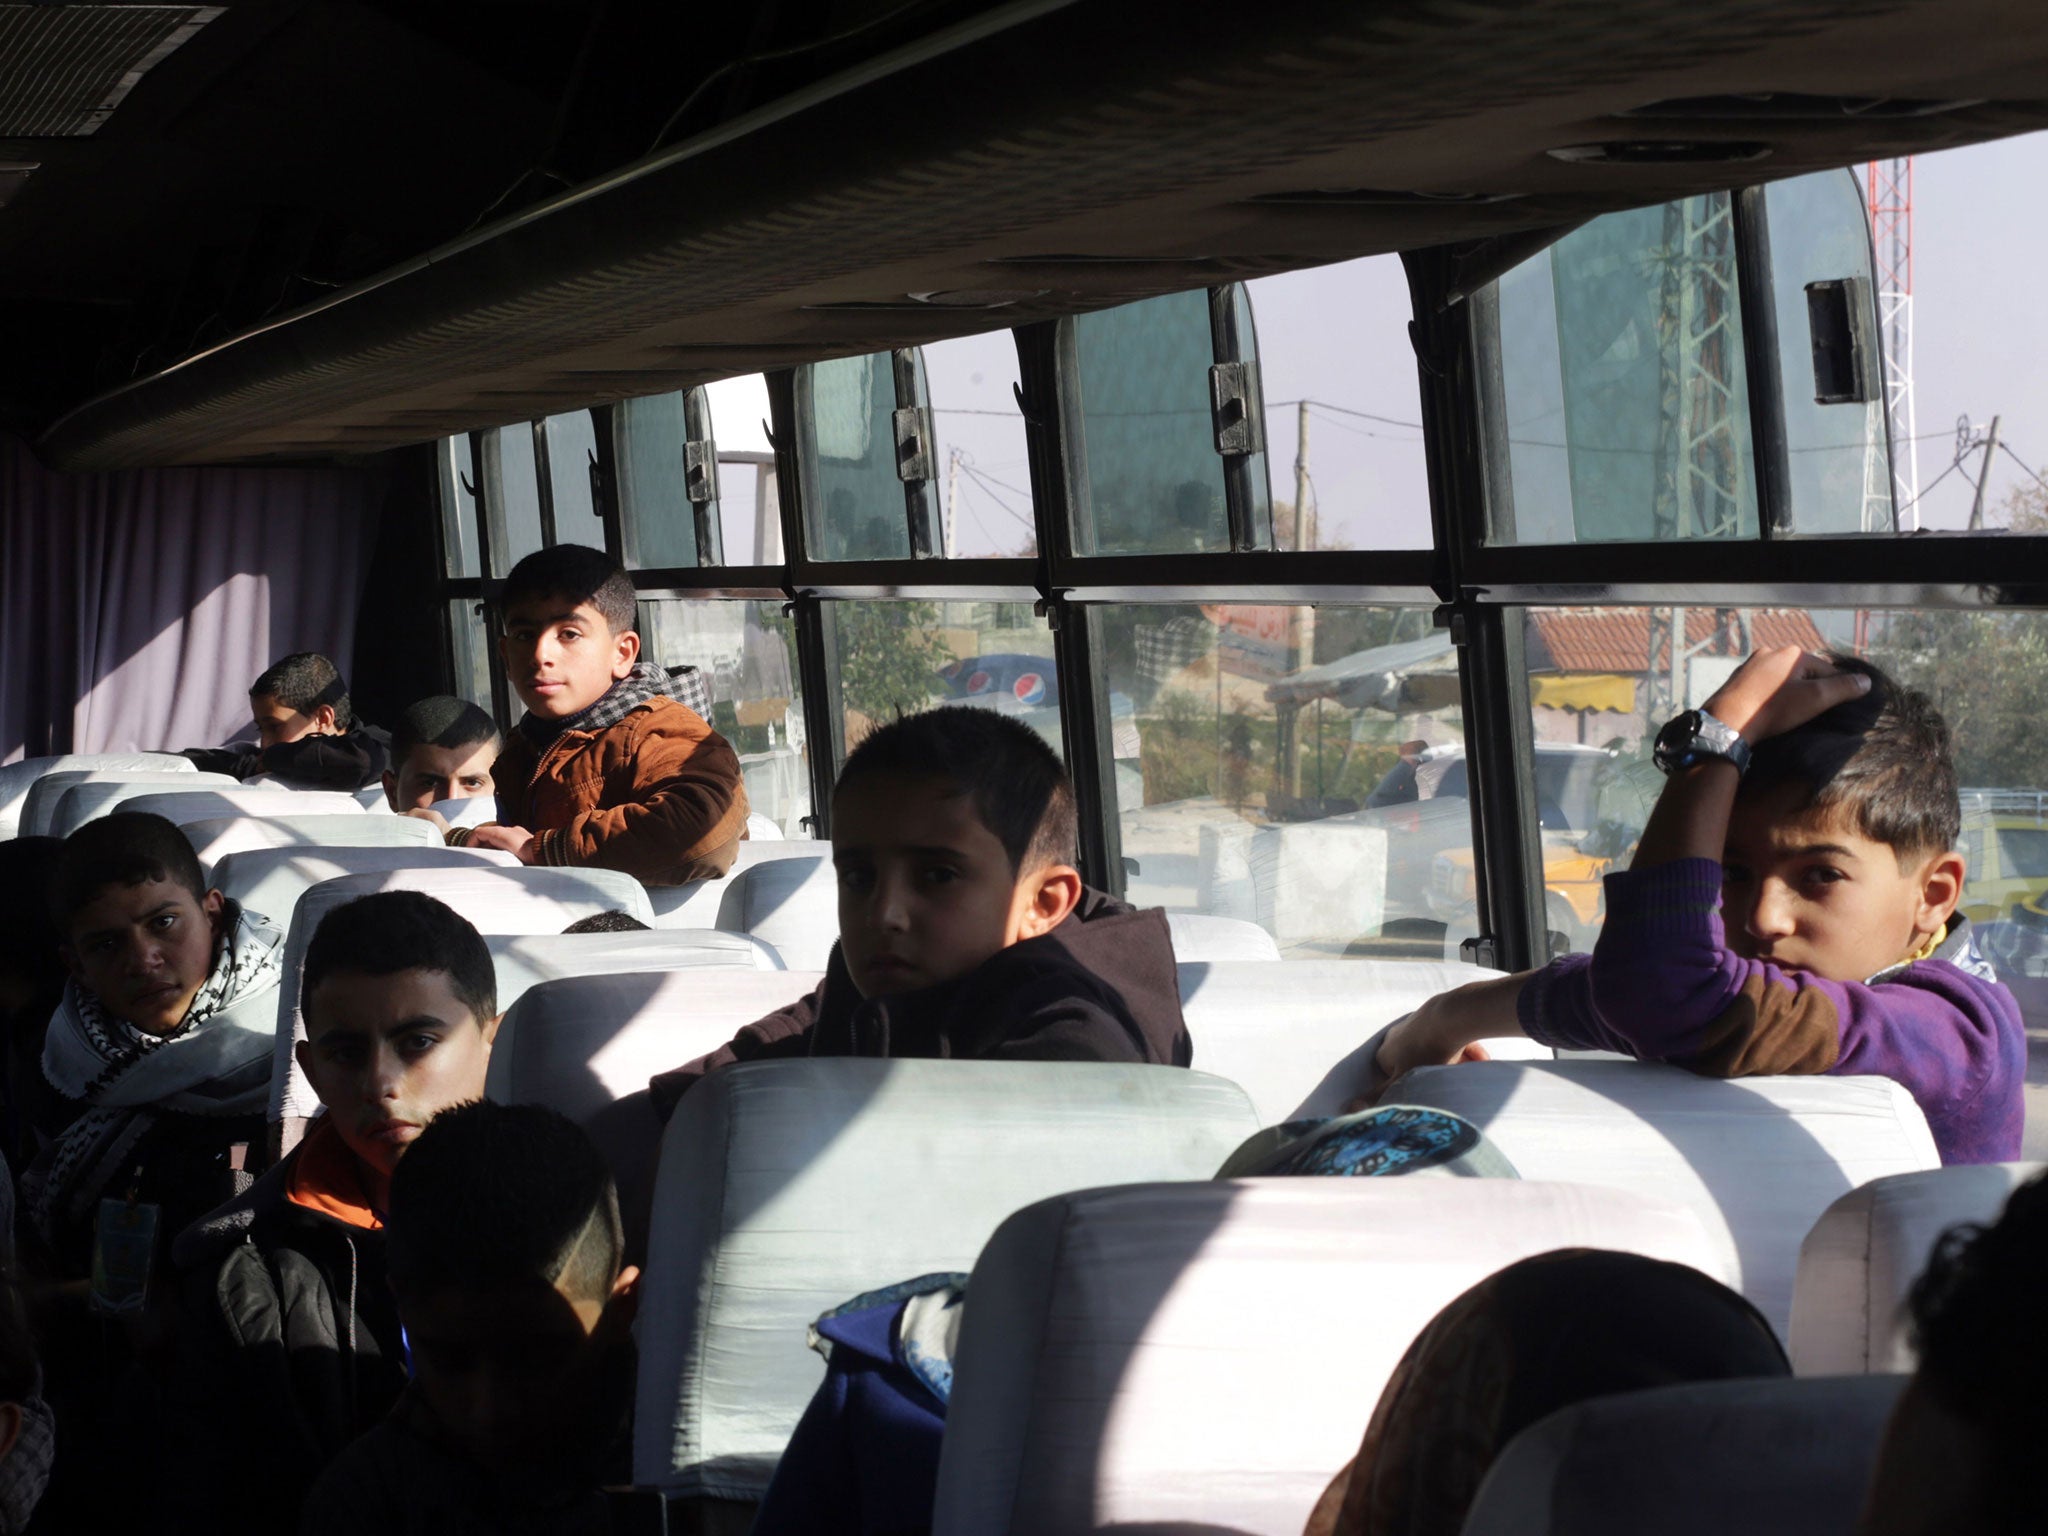 Palestinian children wait on a bus at Erez crossing in Beit Hanun in the north of the Gaza Strip on December 28, 2014, before being prevented by Hamas from entering Israeli territory